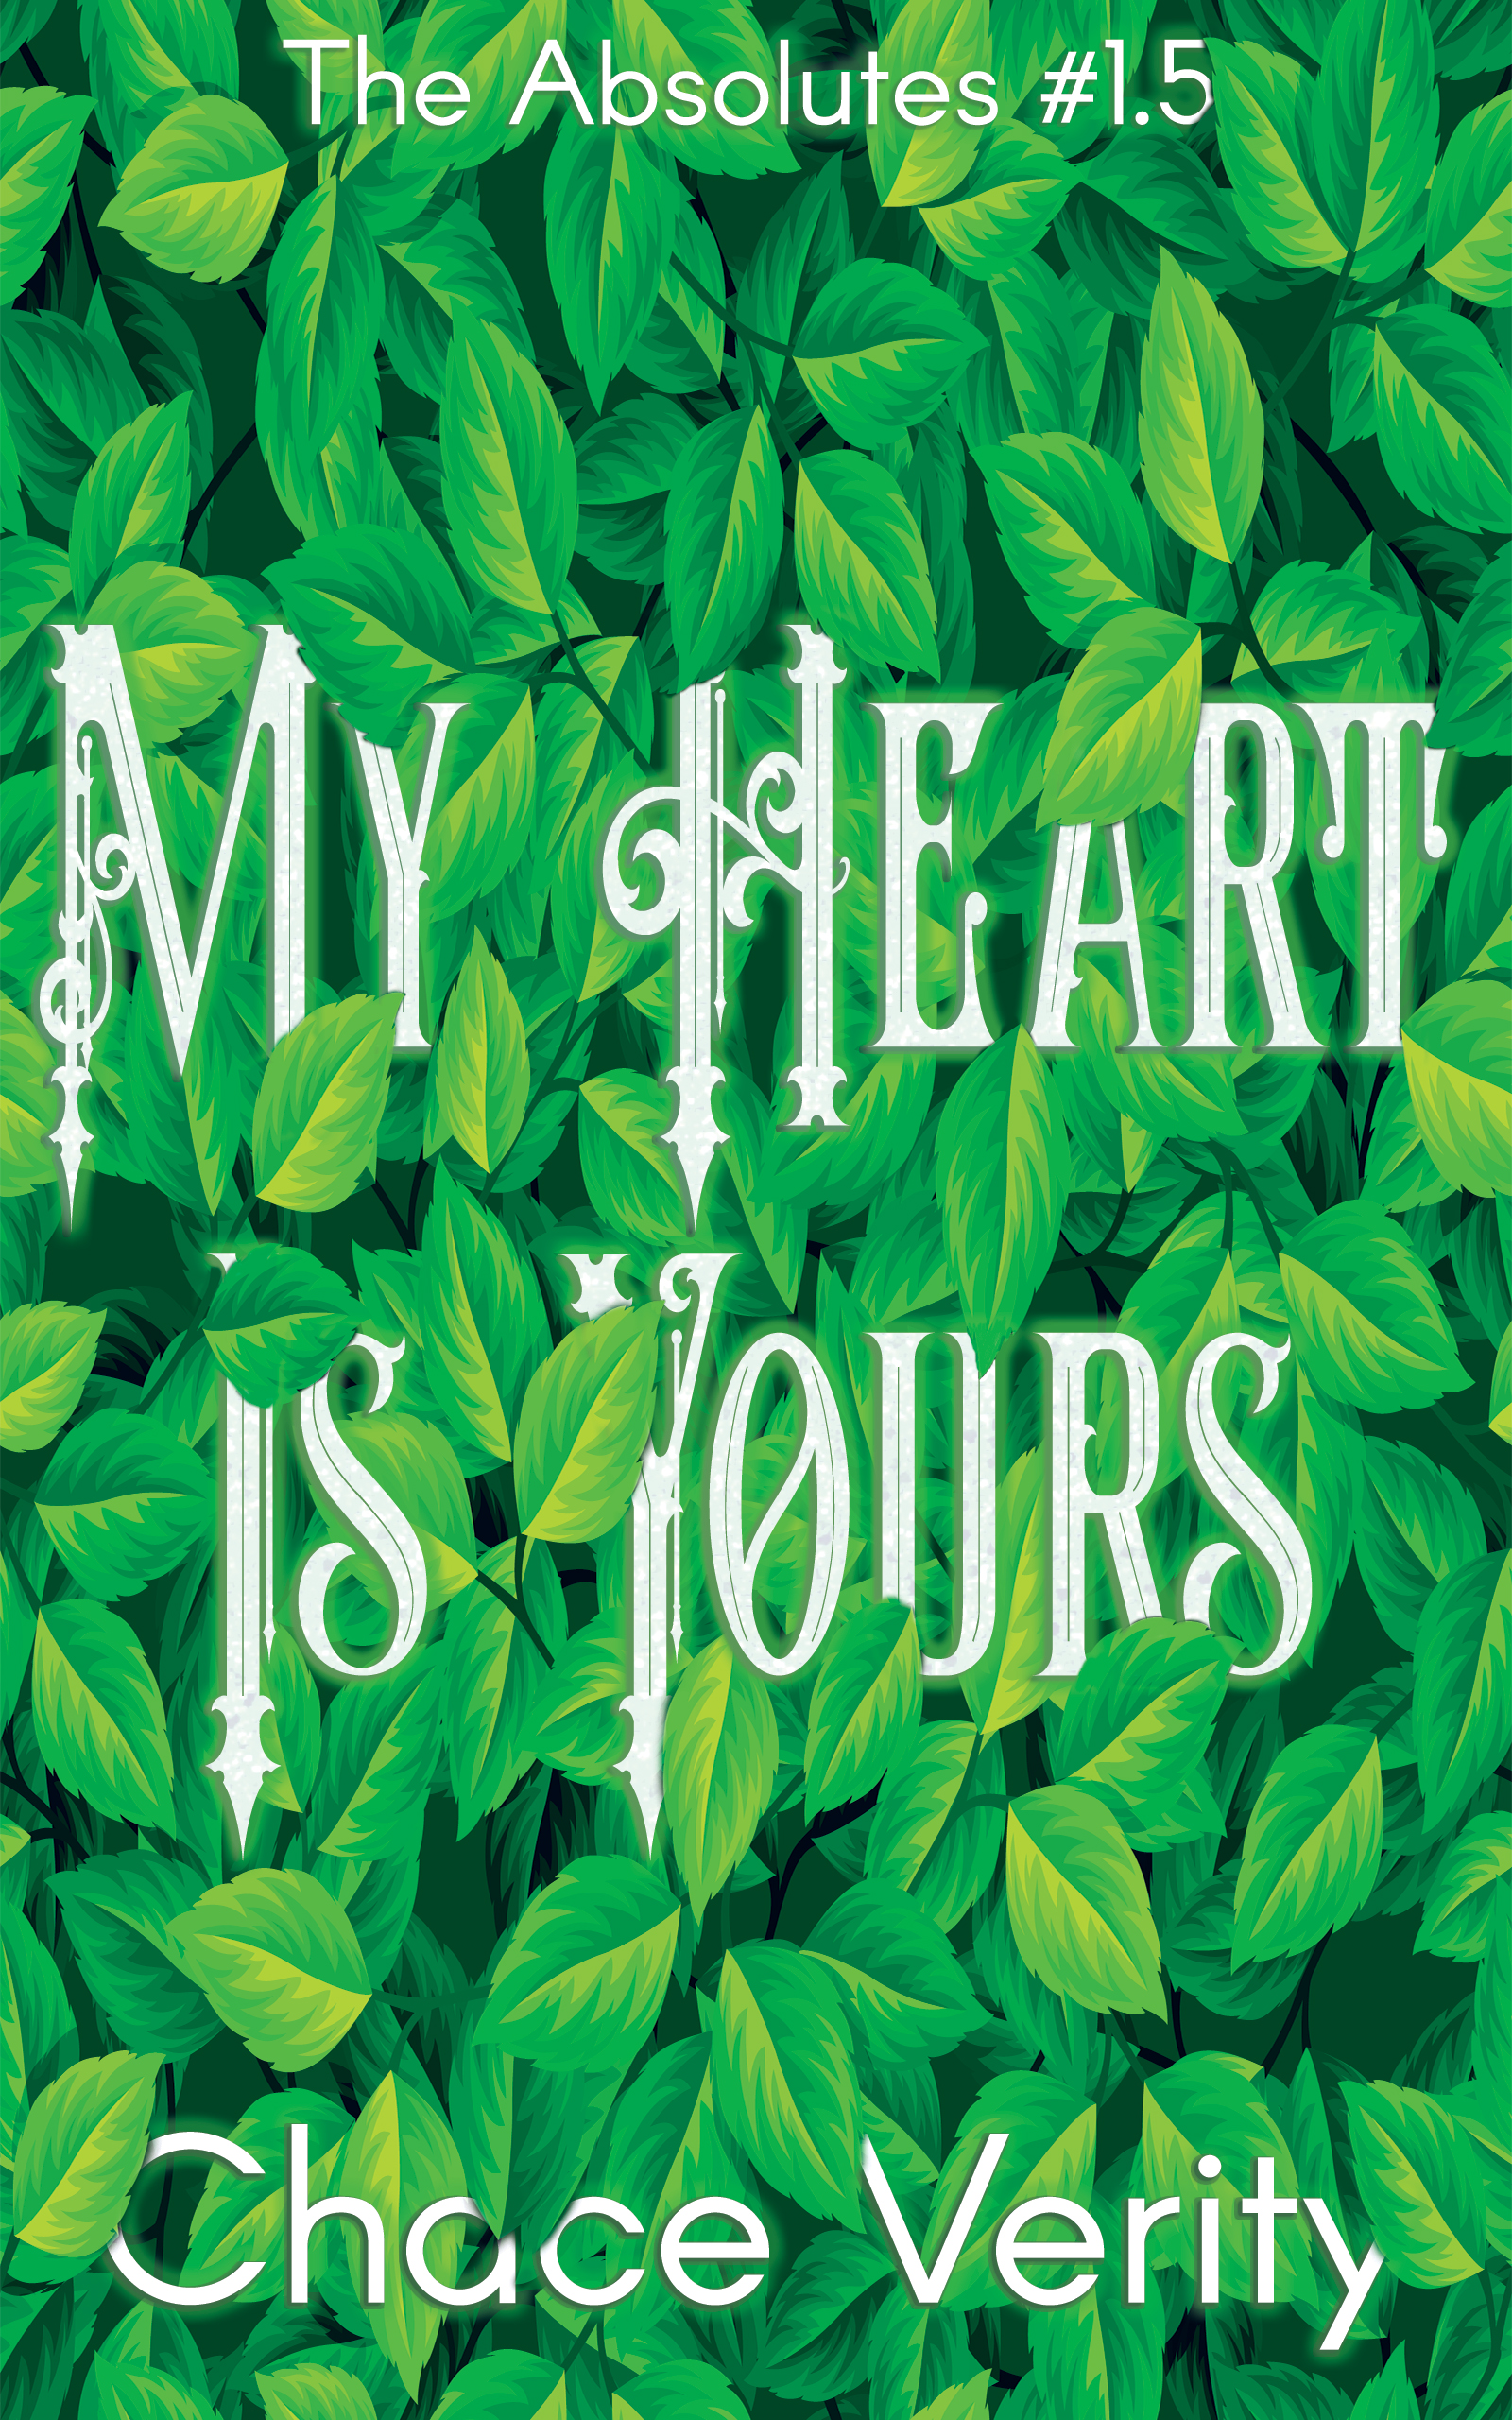 Cover for Chace Verity's My Heart Is Yours featuring the book title meshed with green leaves.